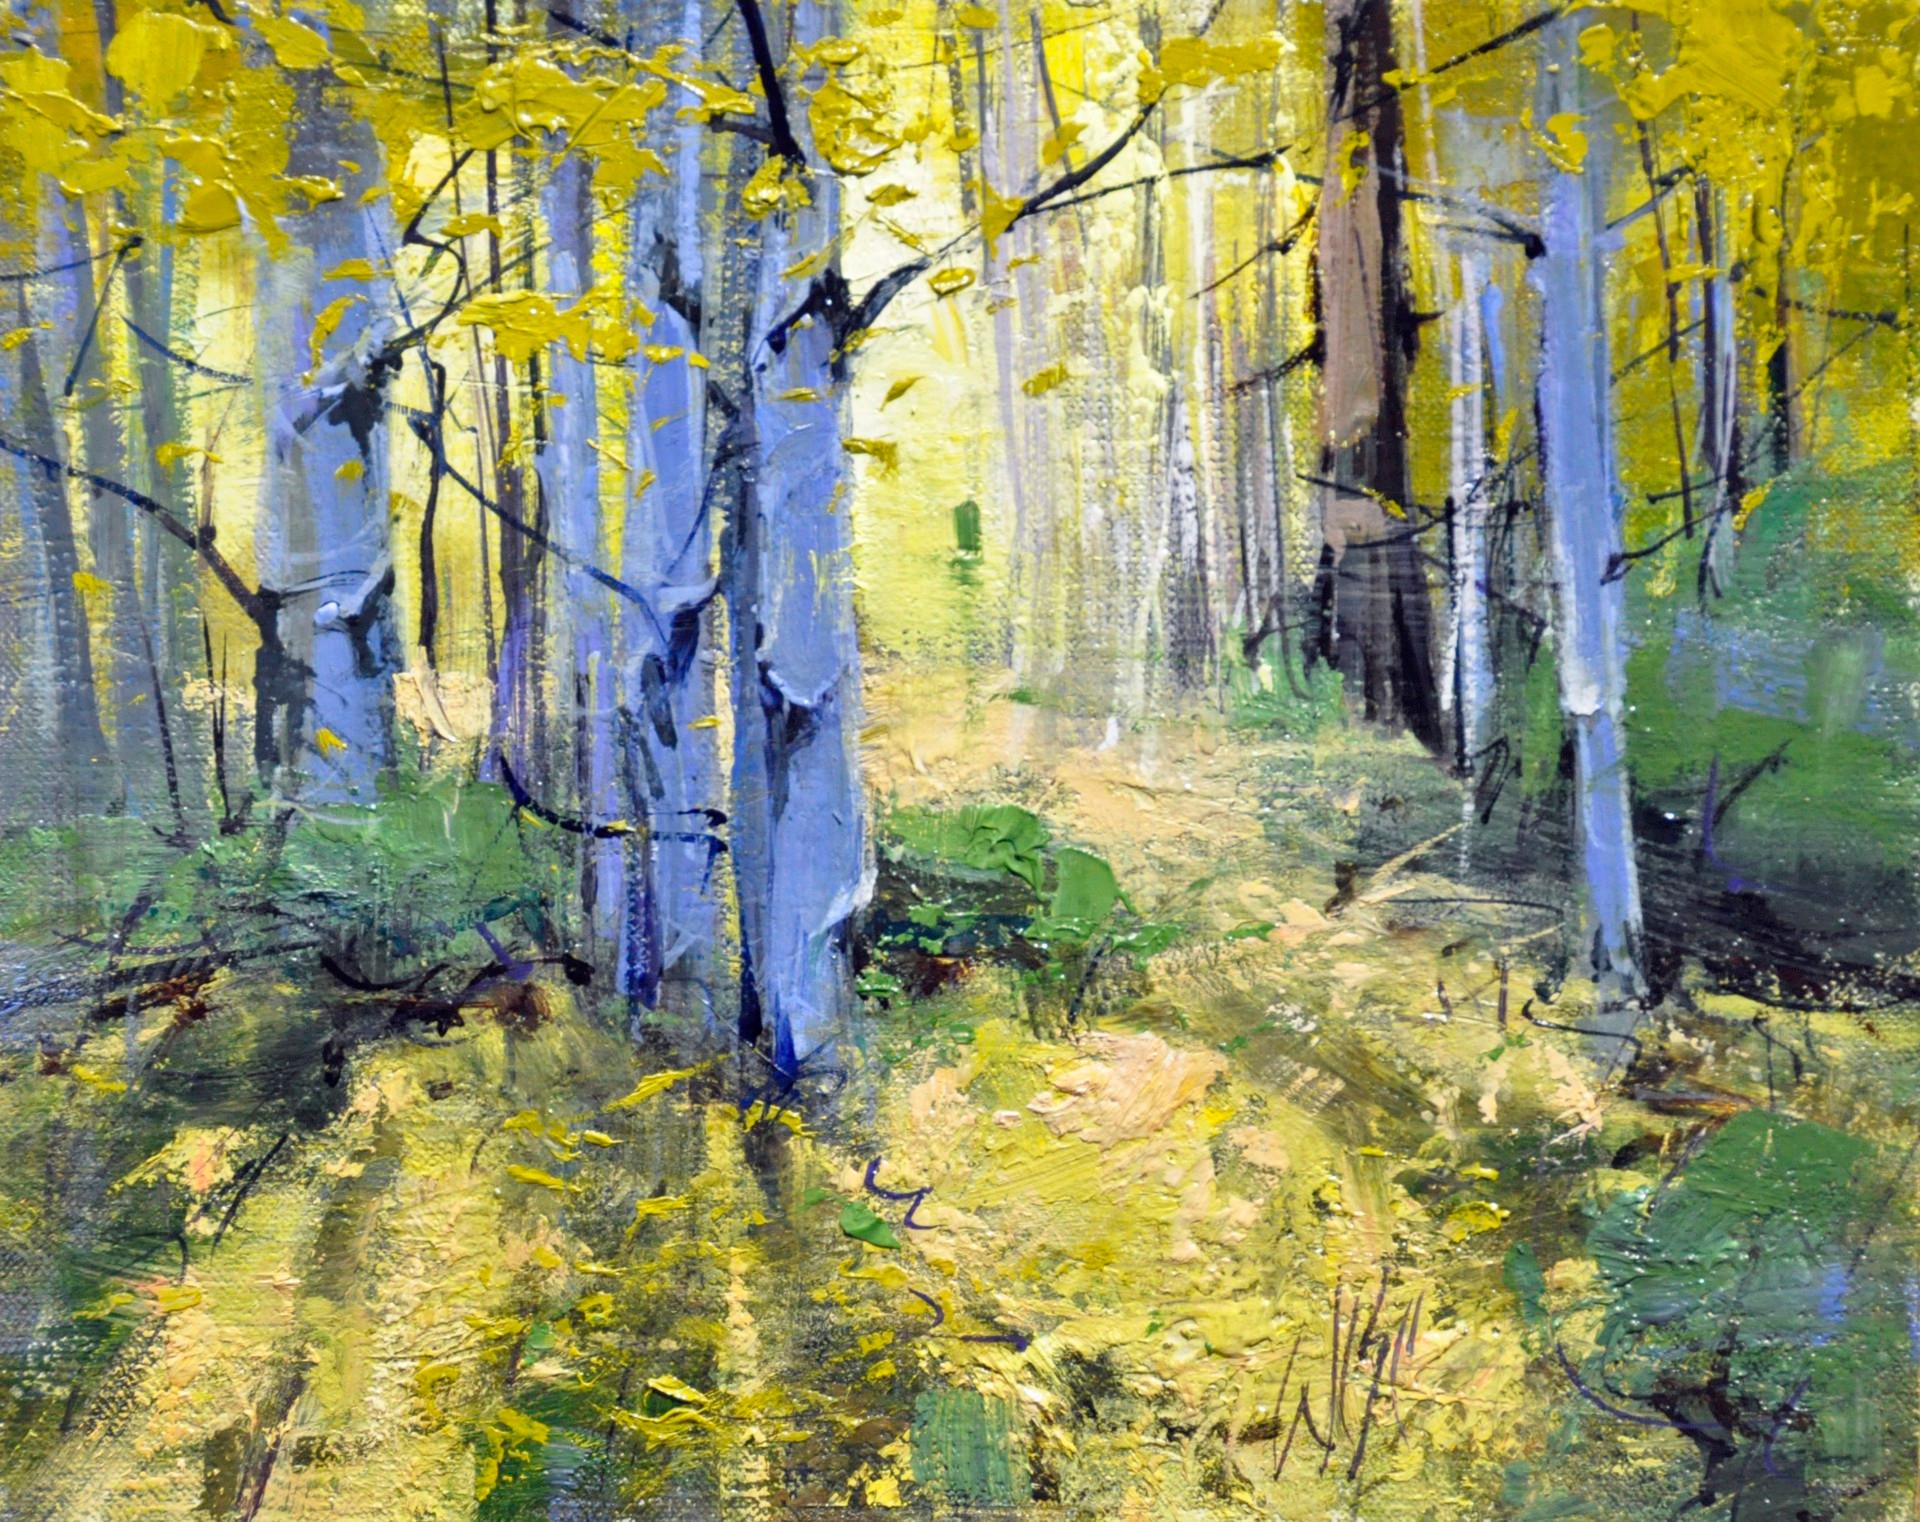 Yellow Woods I - Art by Mike Wise